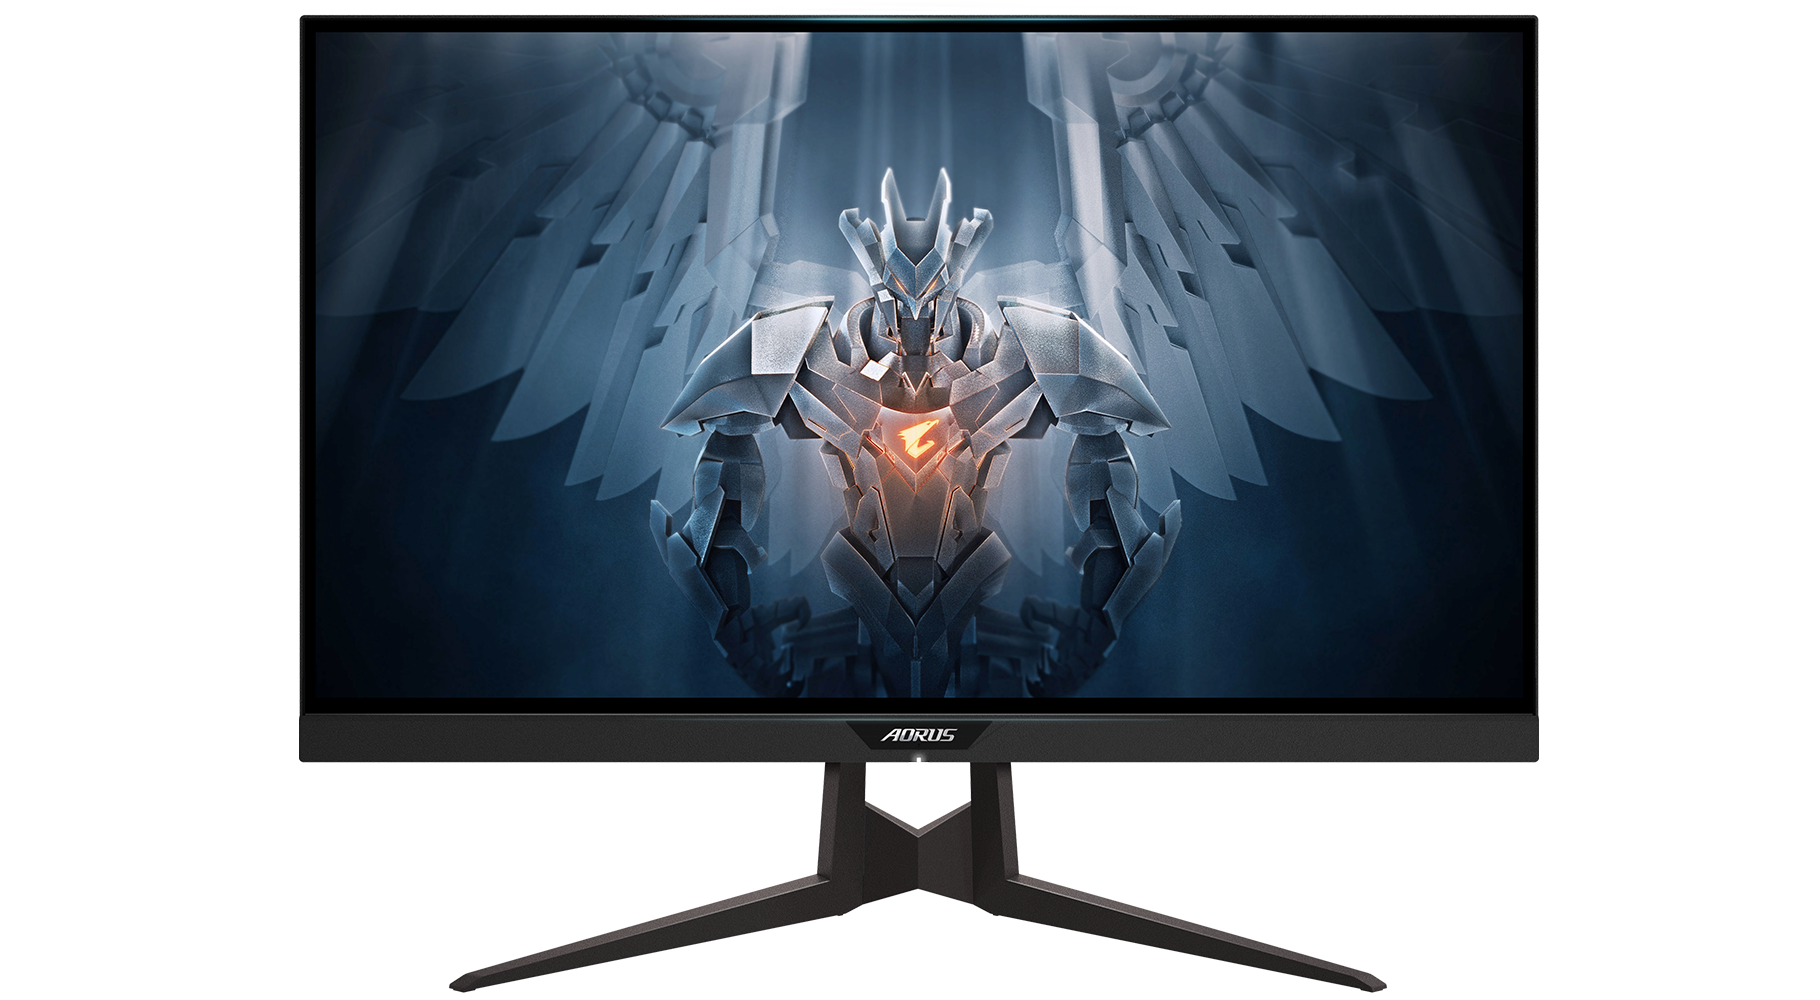 Media asset in full size related to 3dfxzone.it news item entitled as follows: GIGABYTE lancia il gaming monitor AORUS FI27Q con pannello IPS QHD | Image Name: news29890_GIGABYTE-AORUS-FI27Q_2.png